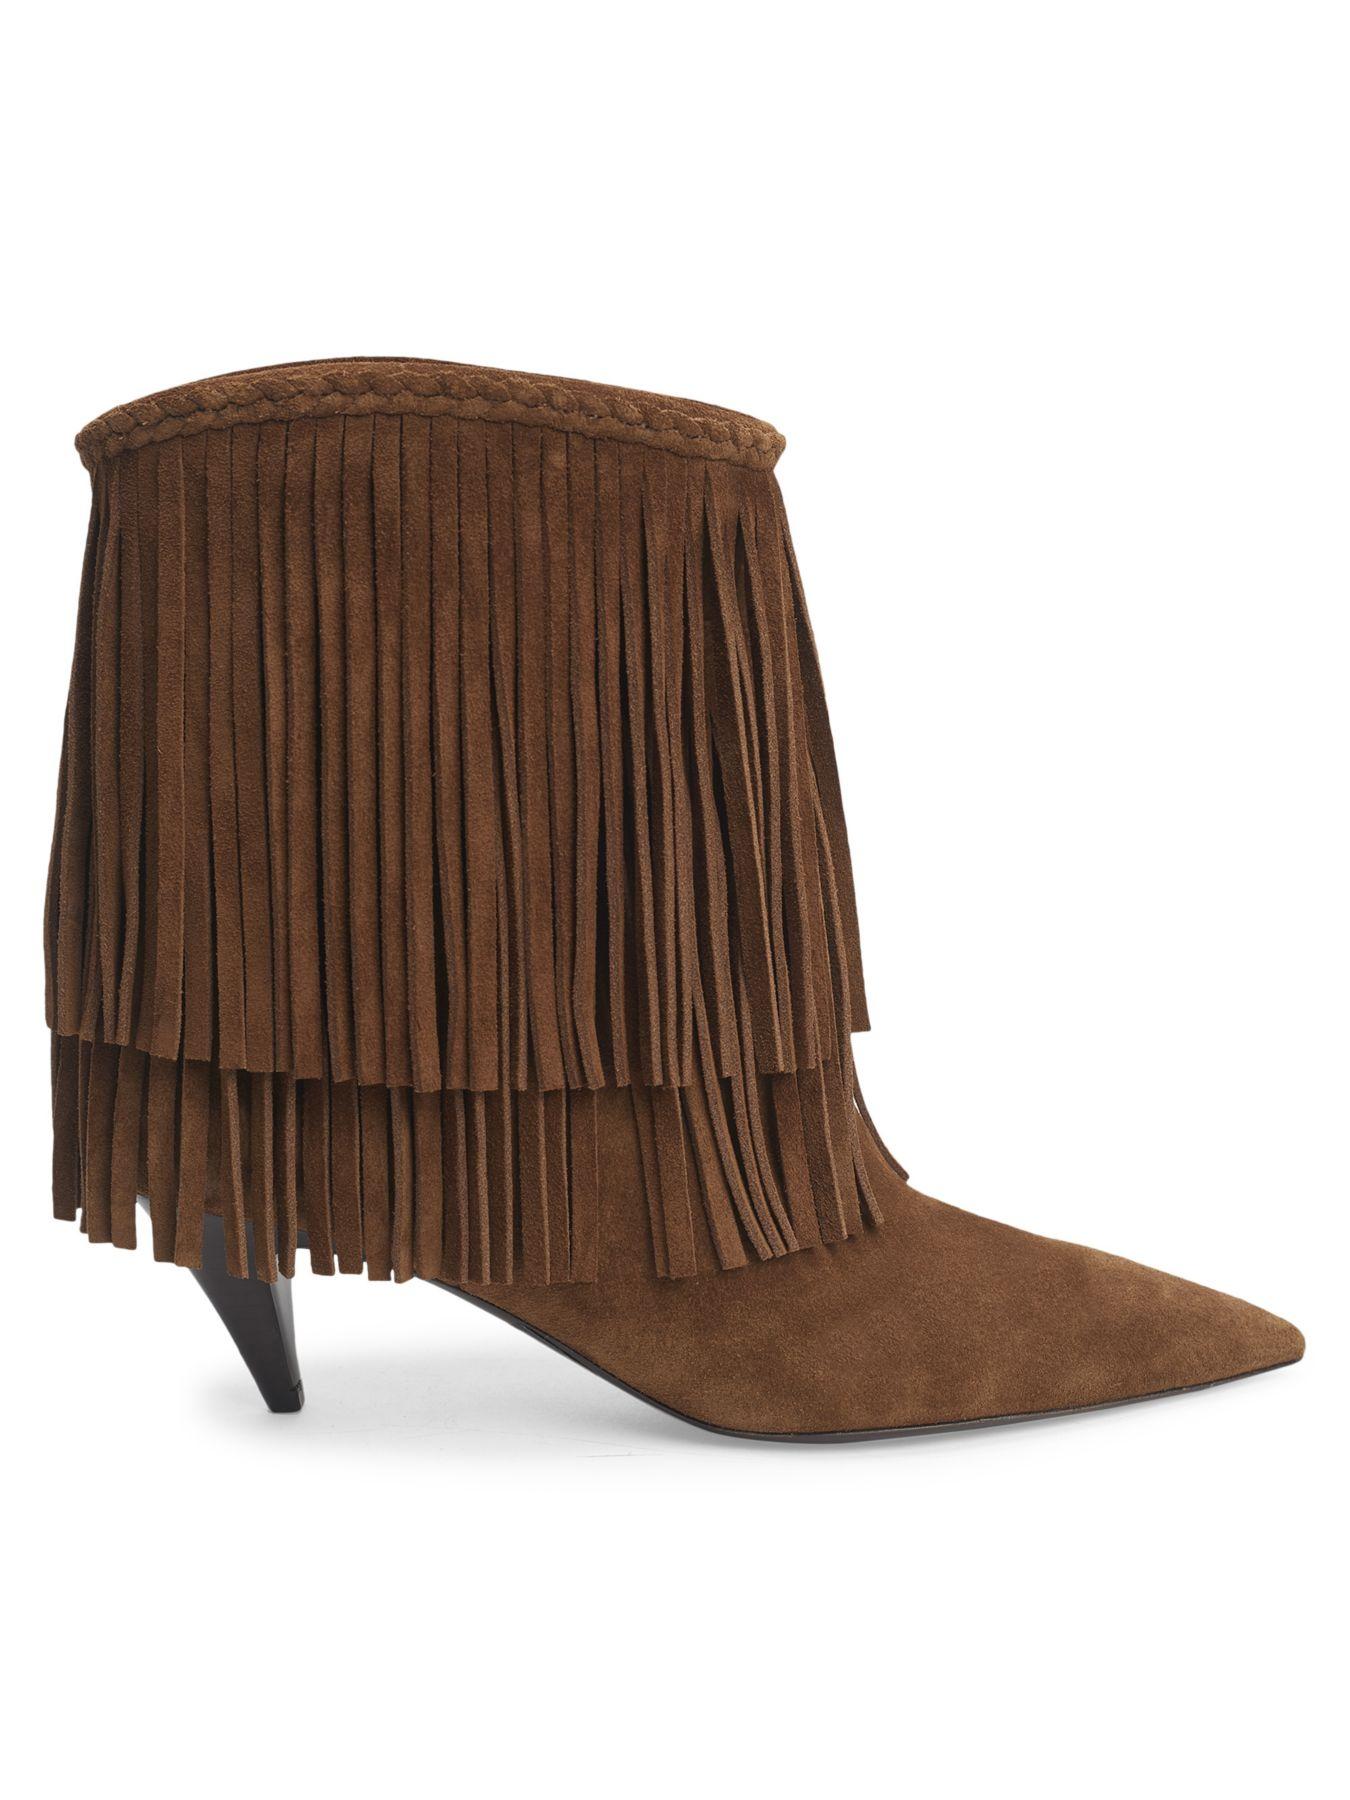 Saint Laurent Suede Fringed Boots in Brown | Lyst